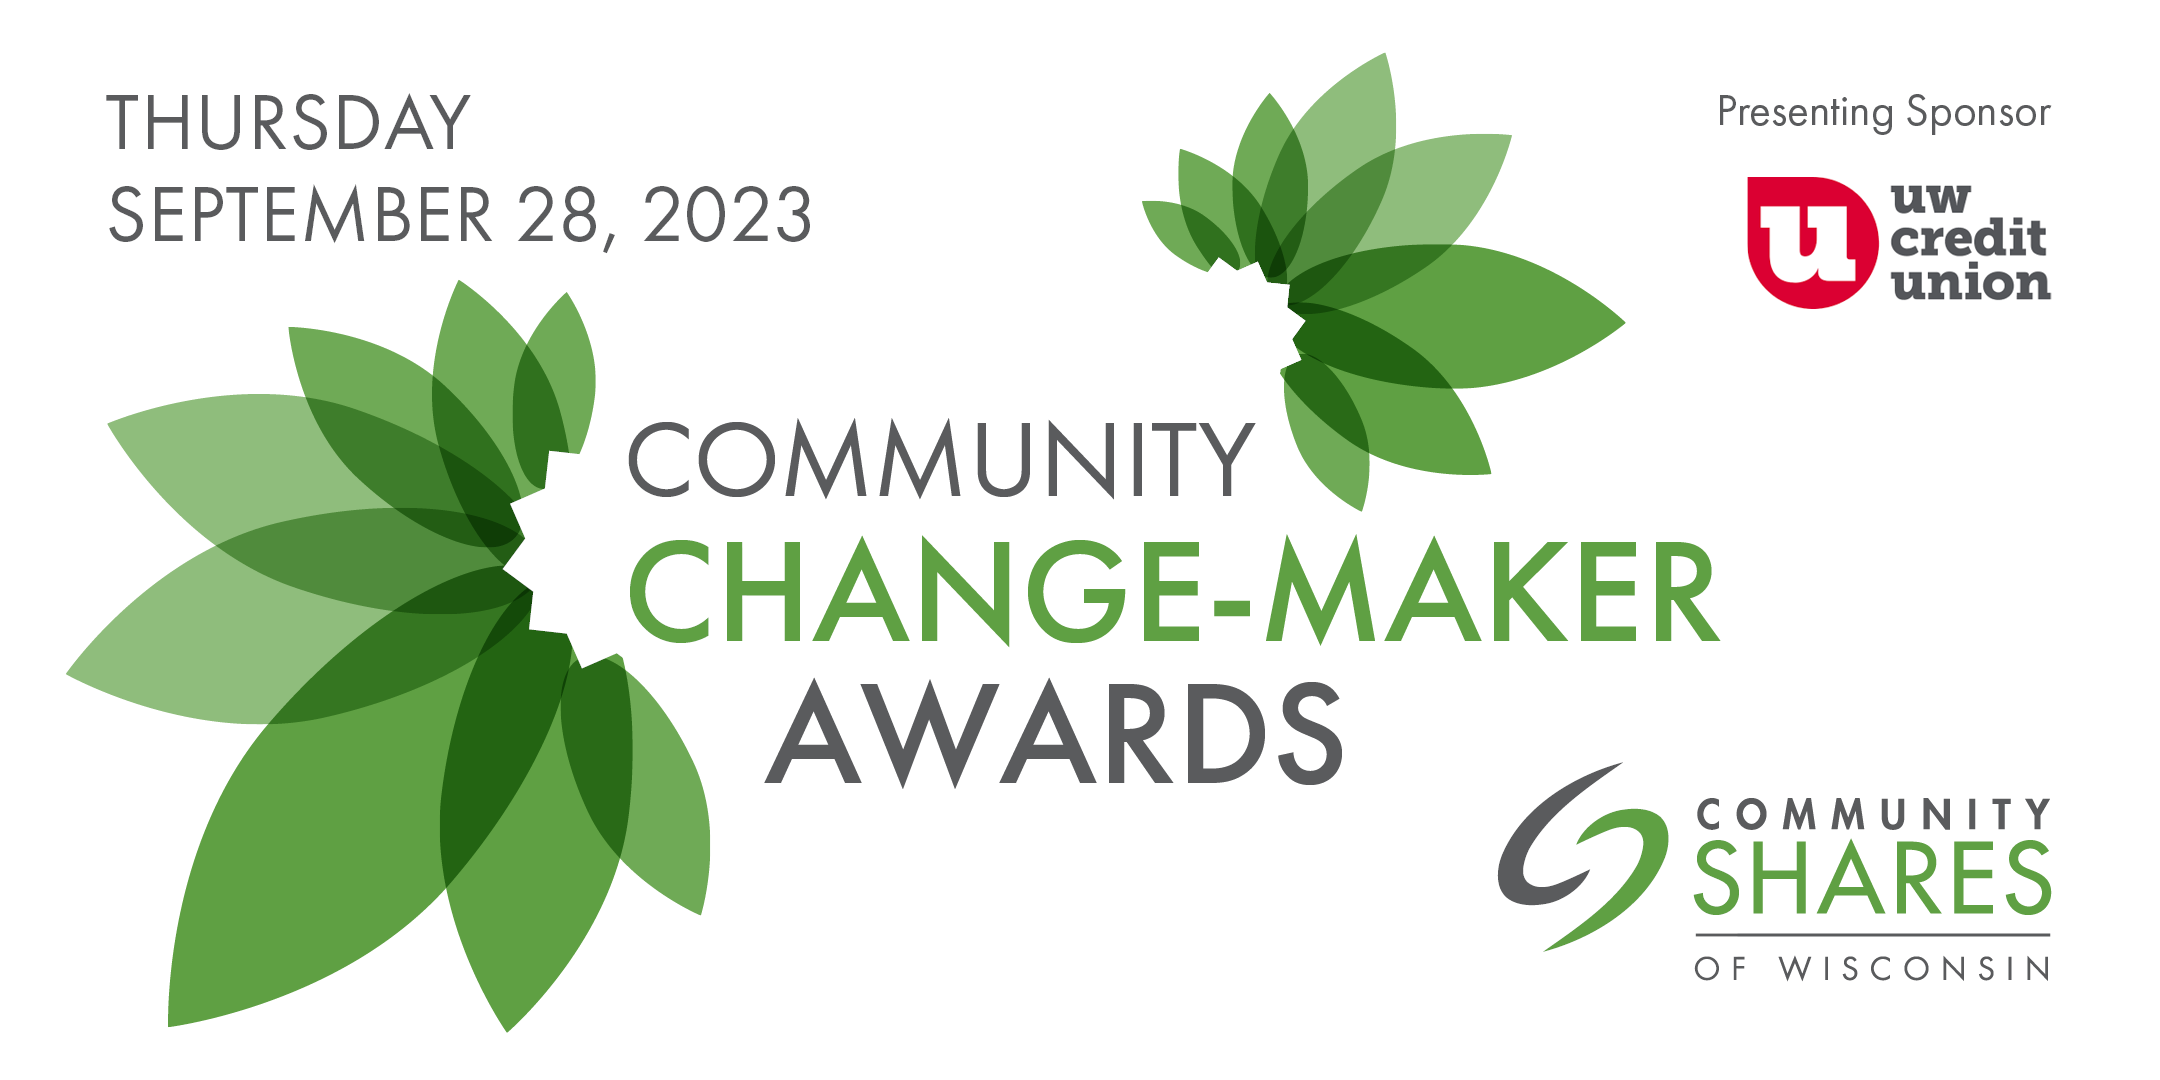 The Community Change-Maker Awards logo in the center with the UW Credit Union logo in the top right corner and the Community Shares logo in the bottom right corner.